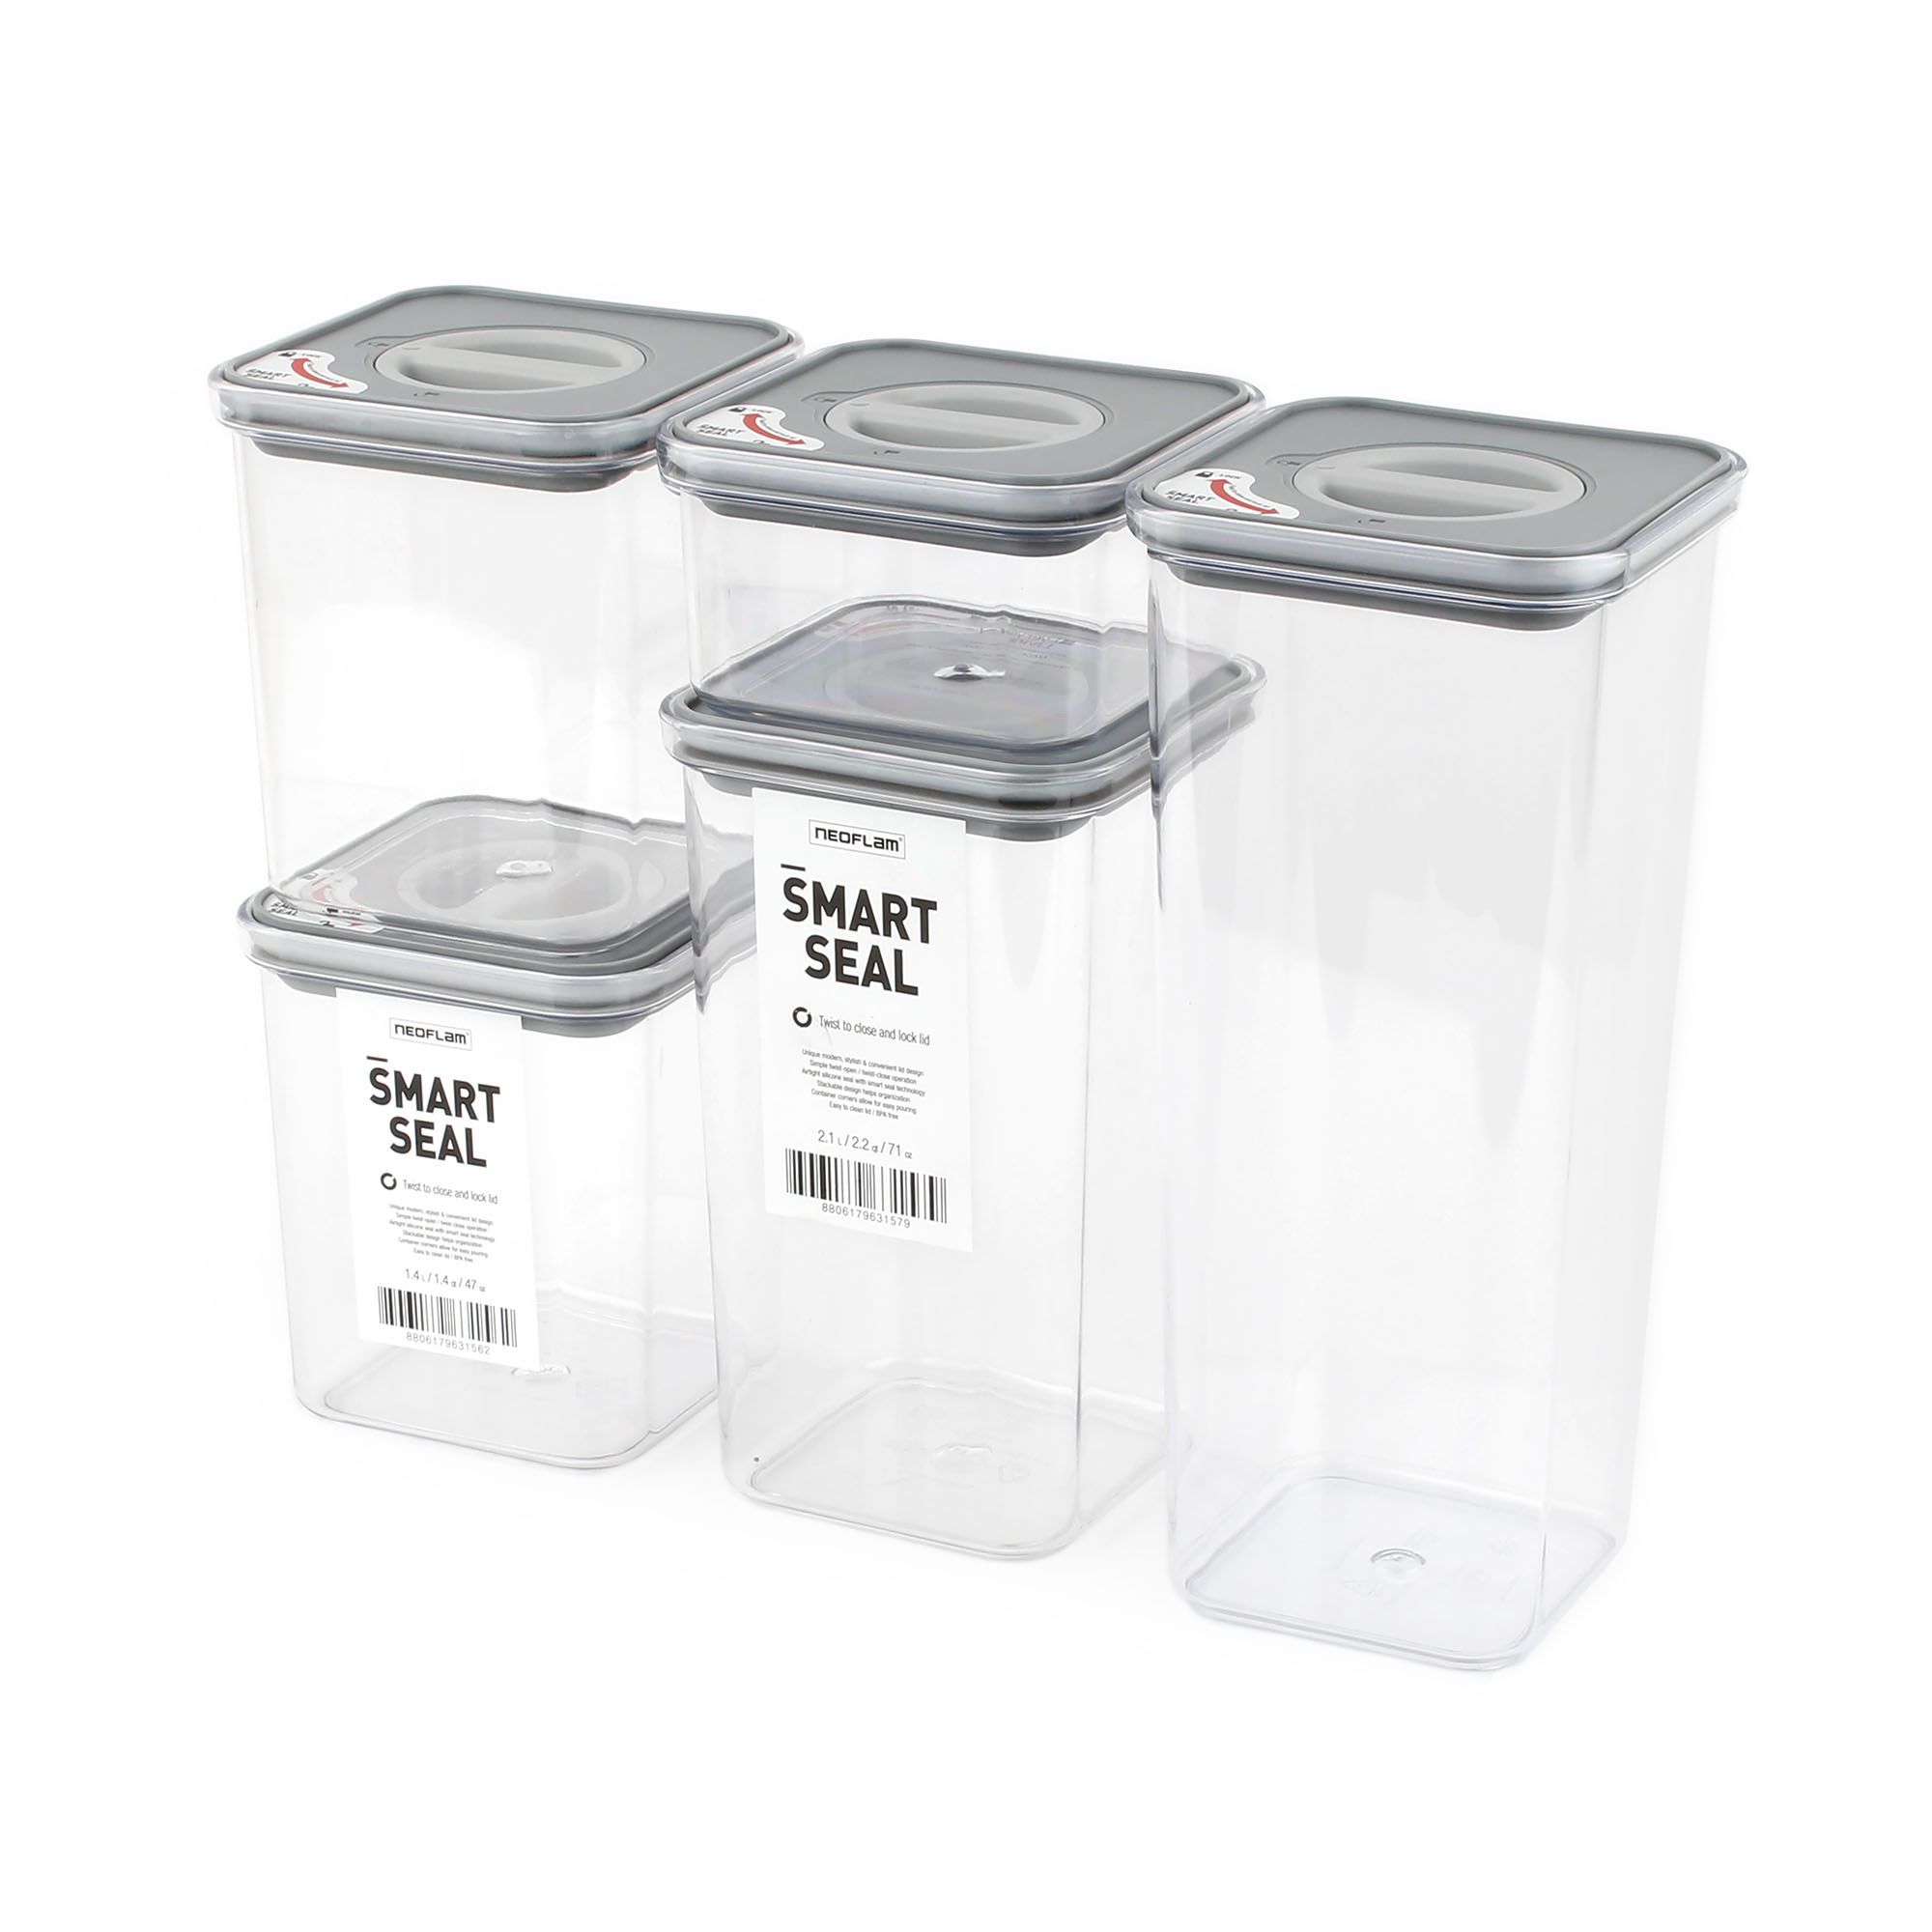 Set of 3) NEOFLAM Airtight Smart Seal Food Storage Container